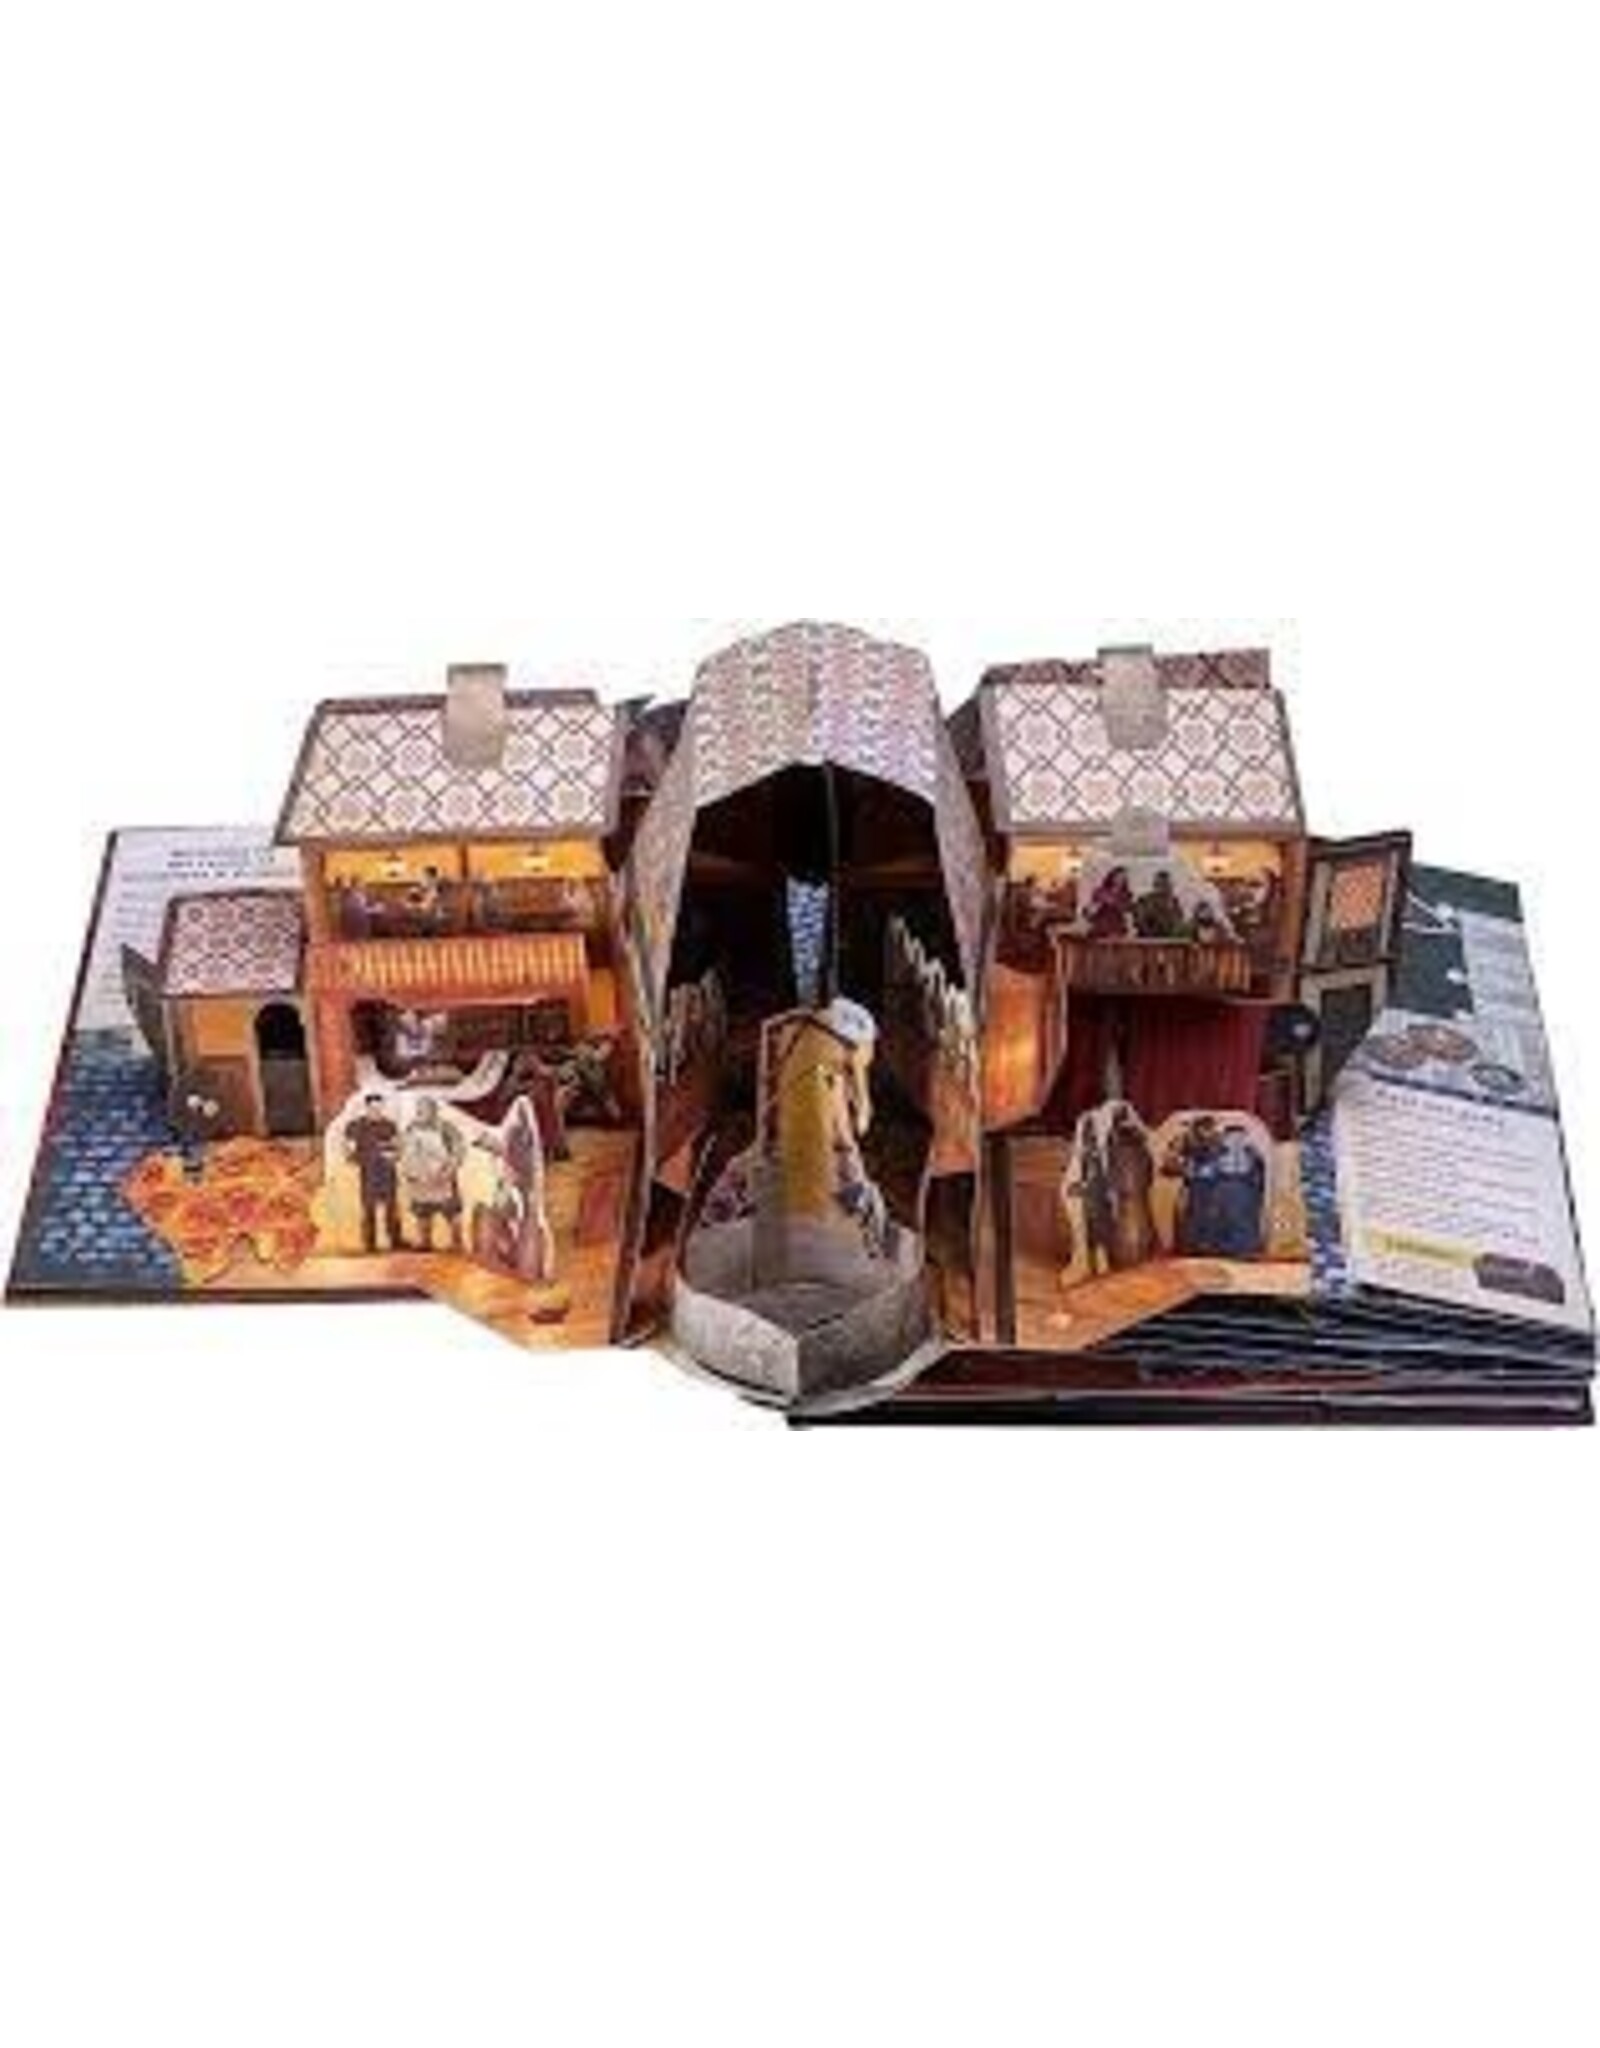 D&D: The Ultimate Pop-Up Book